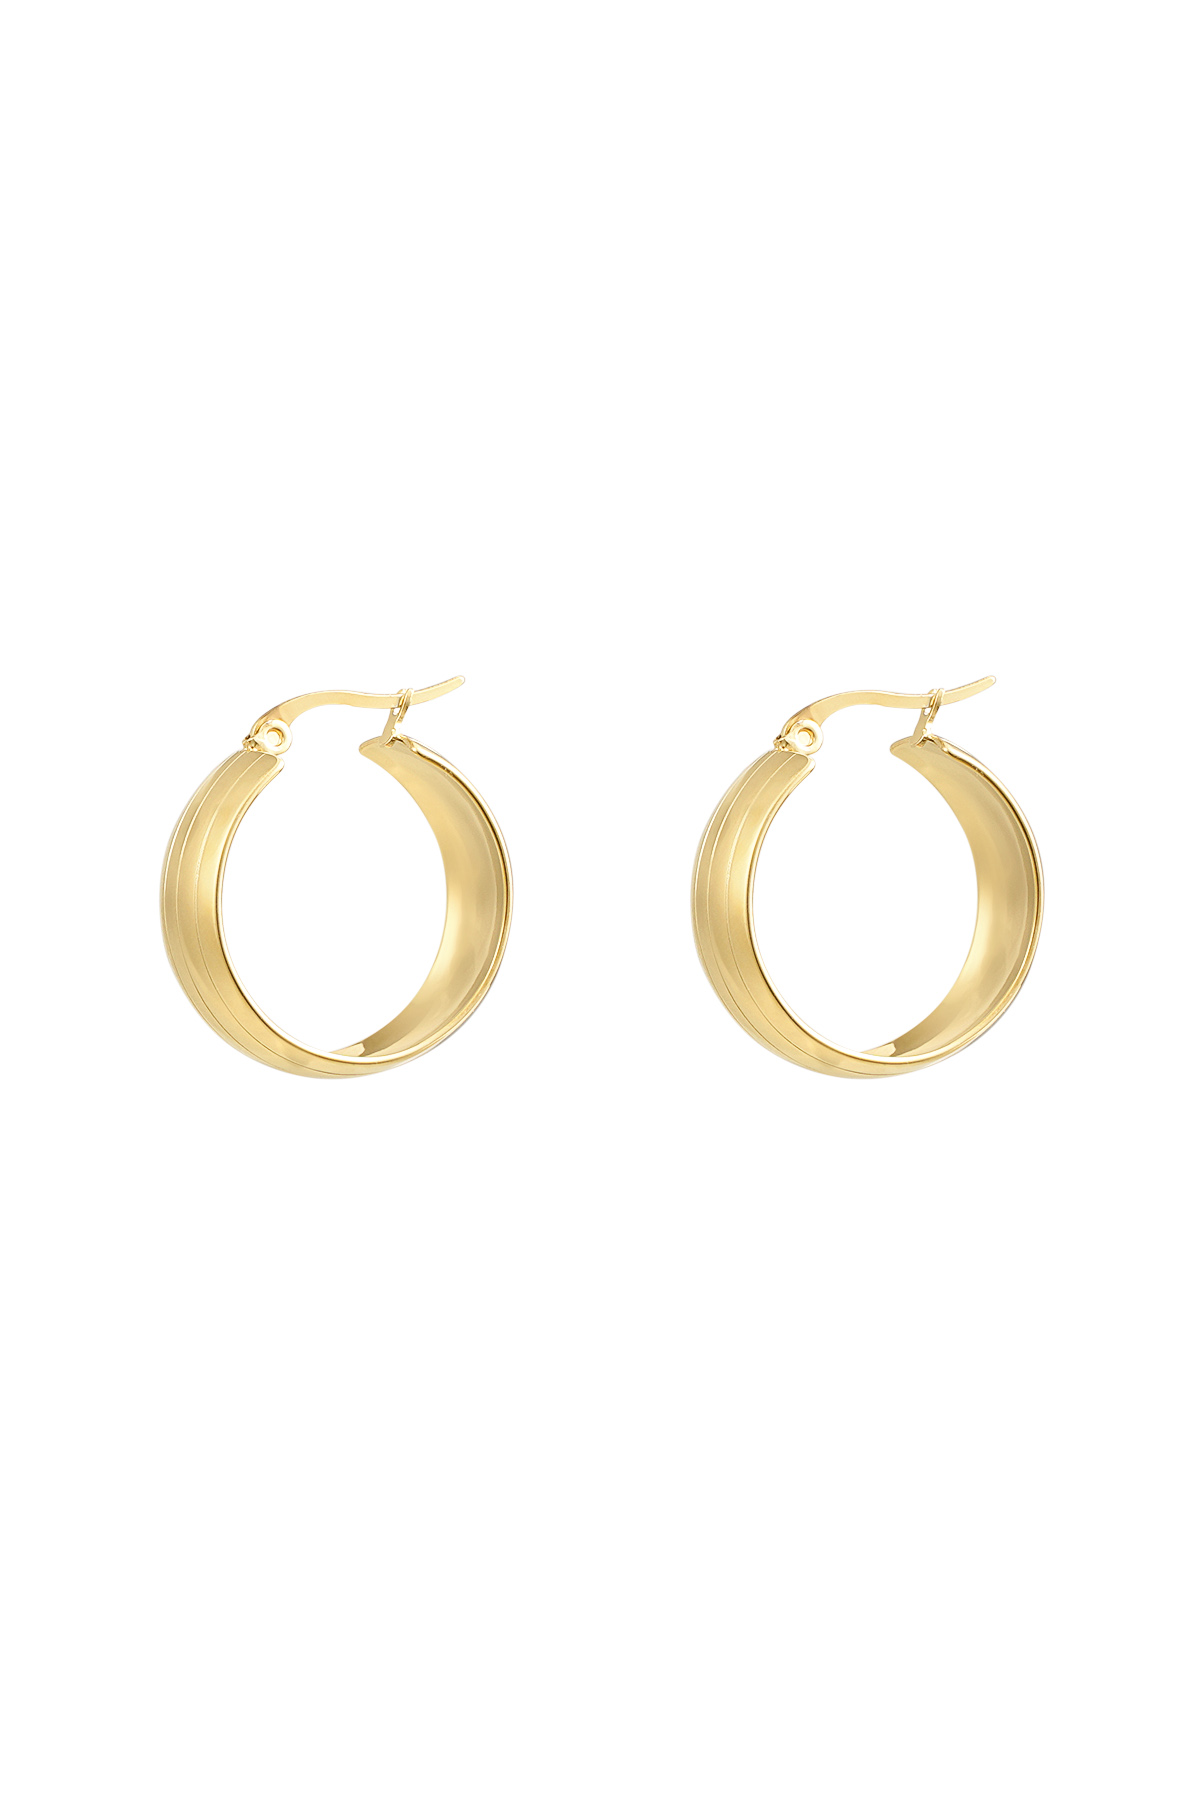 Round earrings with small structure - gold h5 